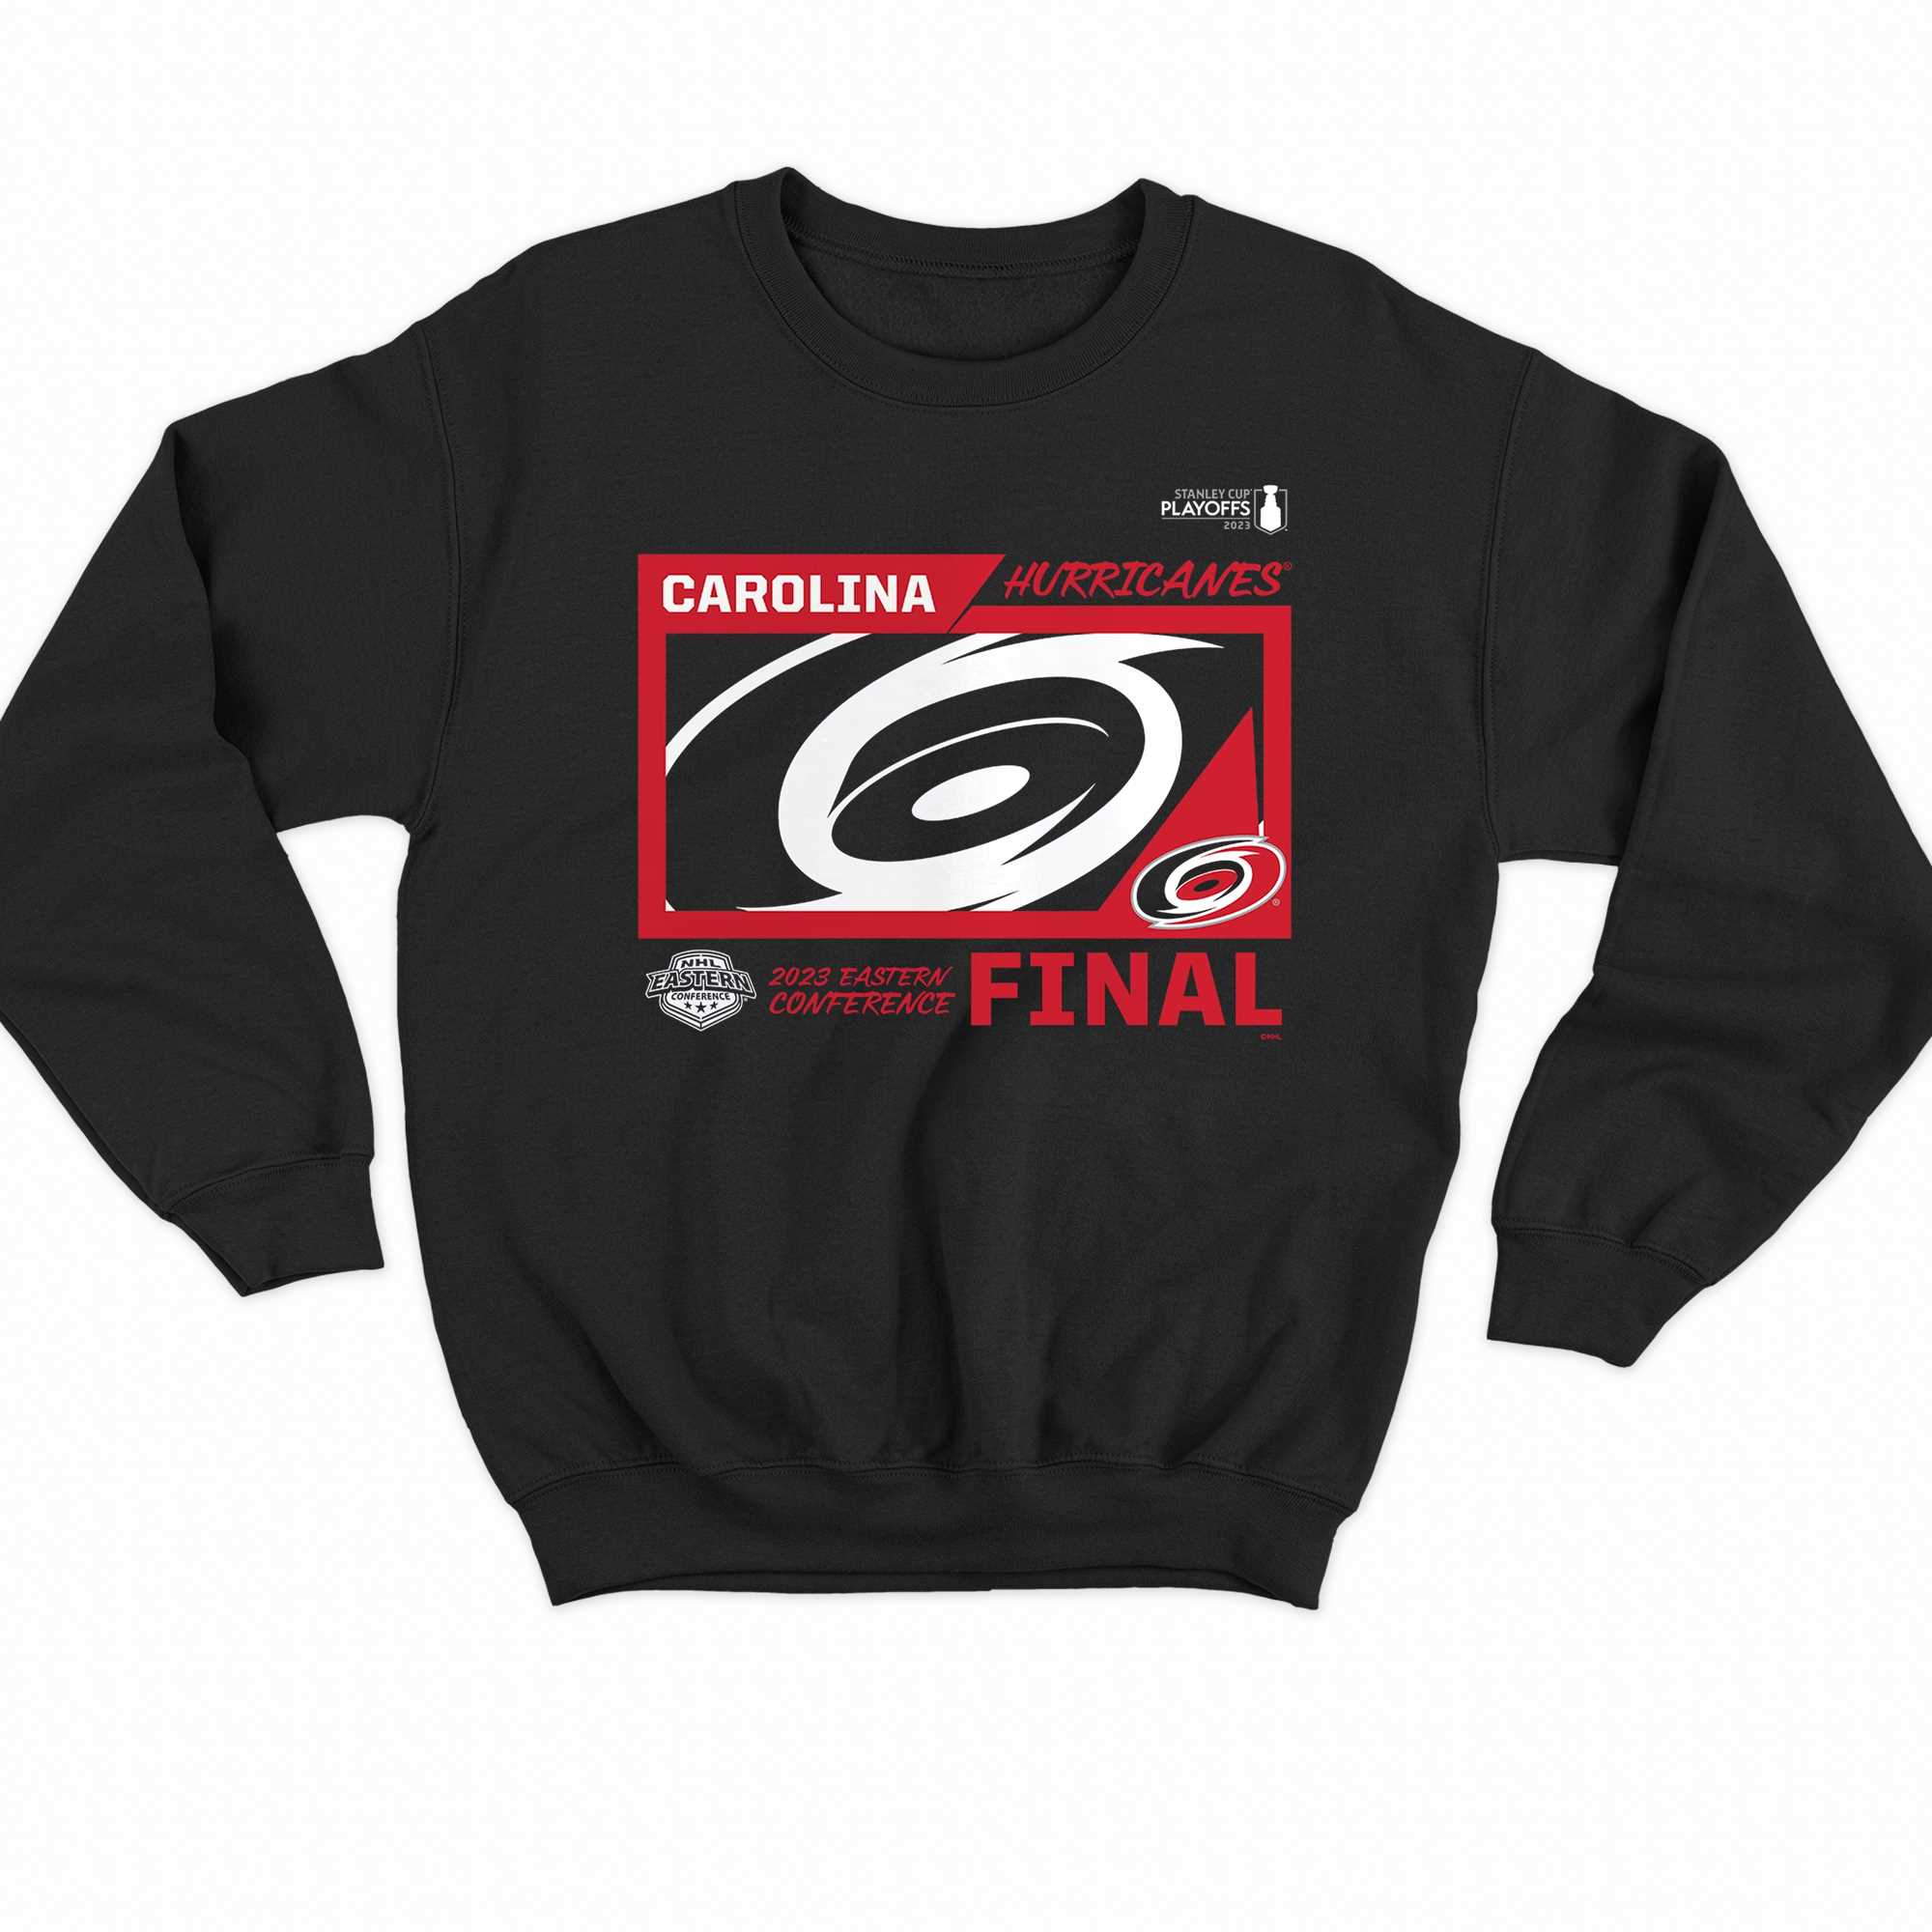 Carolina Hurricanes Fanatics Branded 2023 Stanley Cup Playoffs Eastern Conference Final T-shirt 